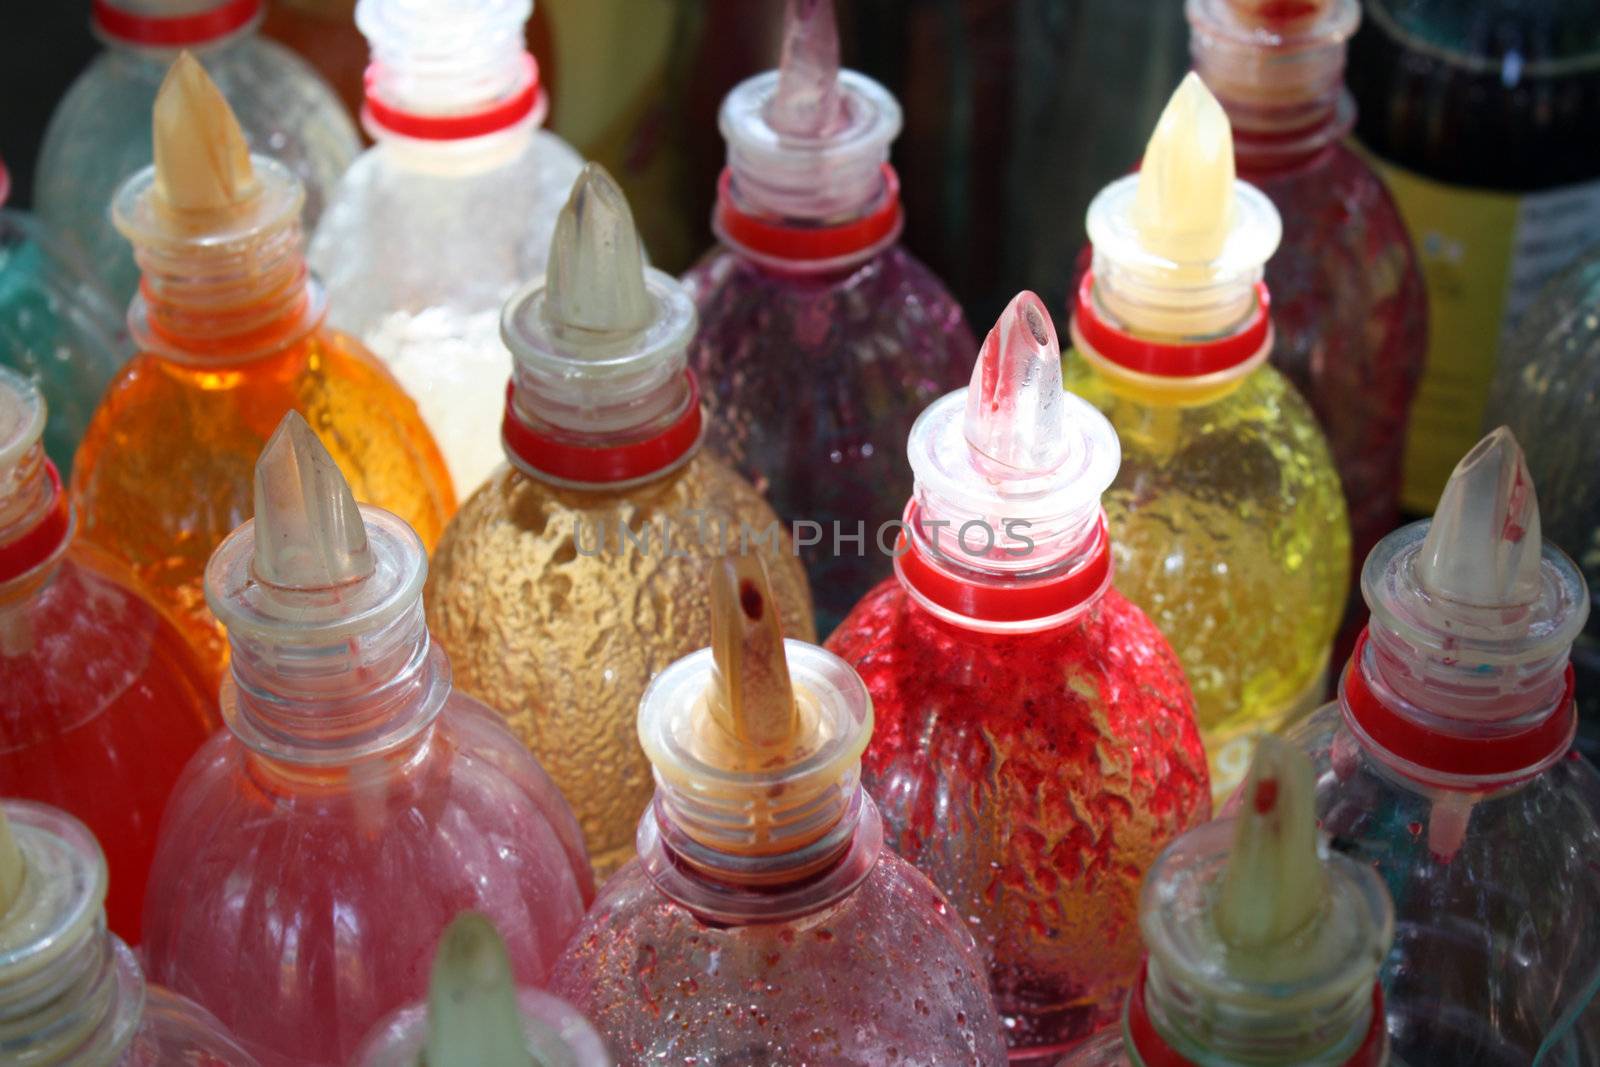 Bottles containing flavours of various fruit punches for testing.